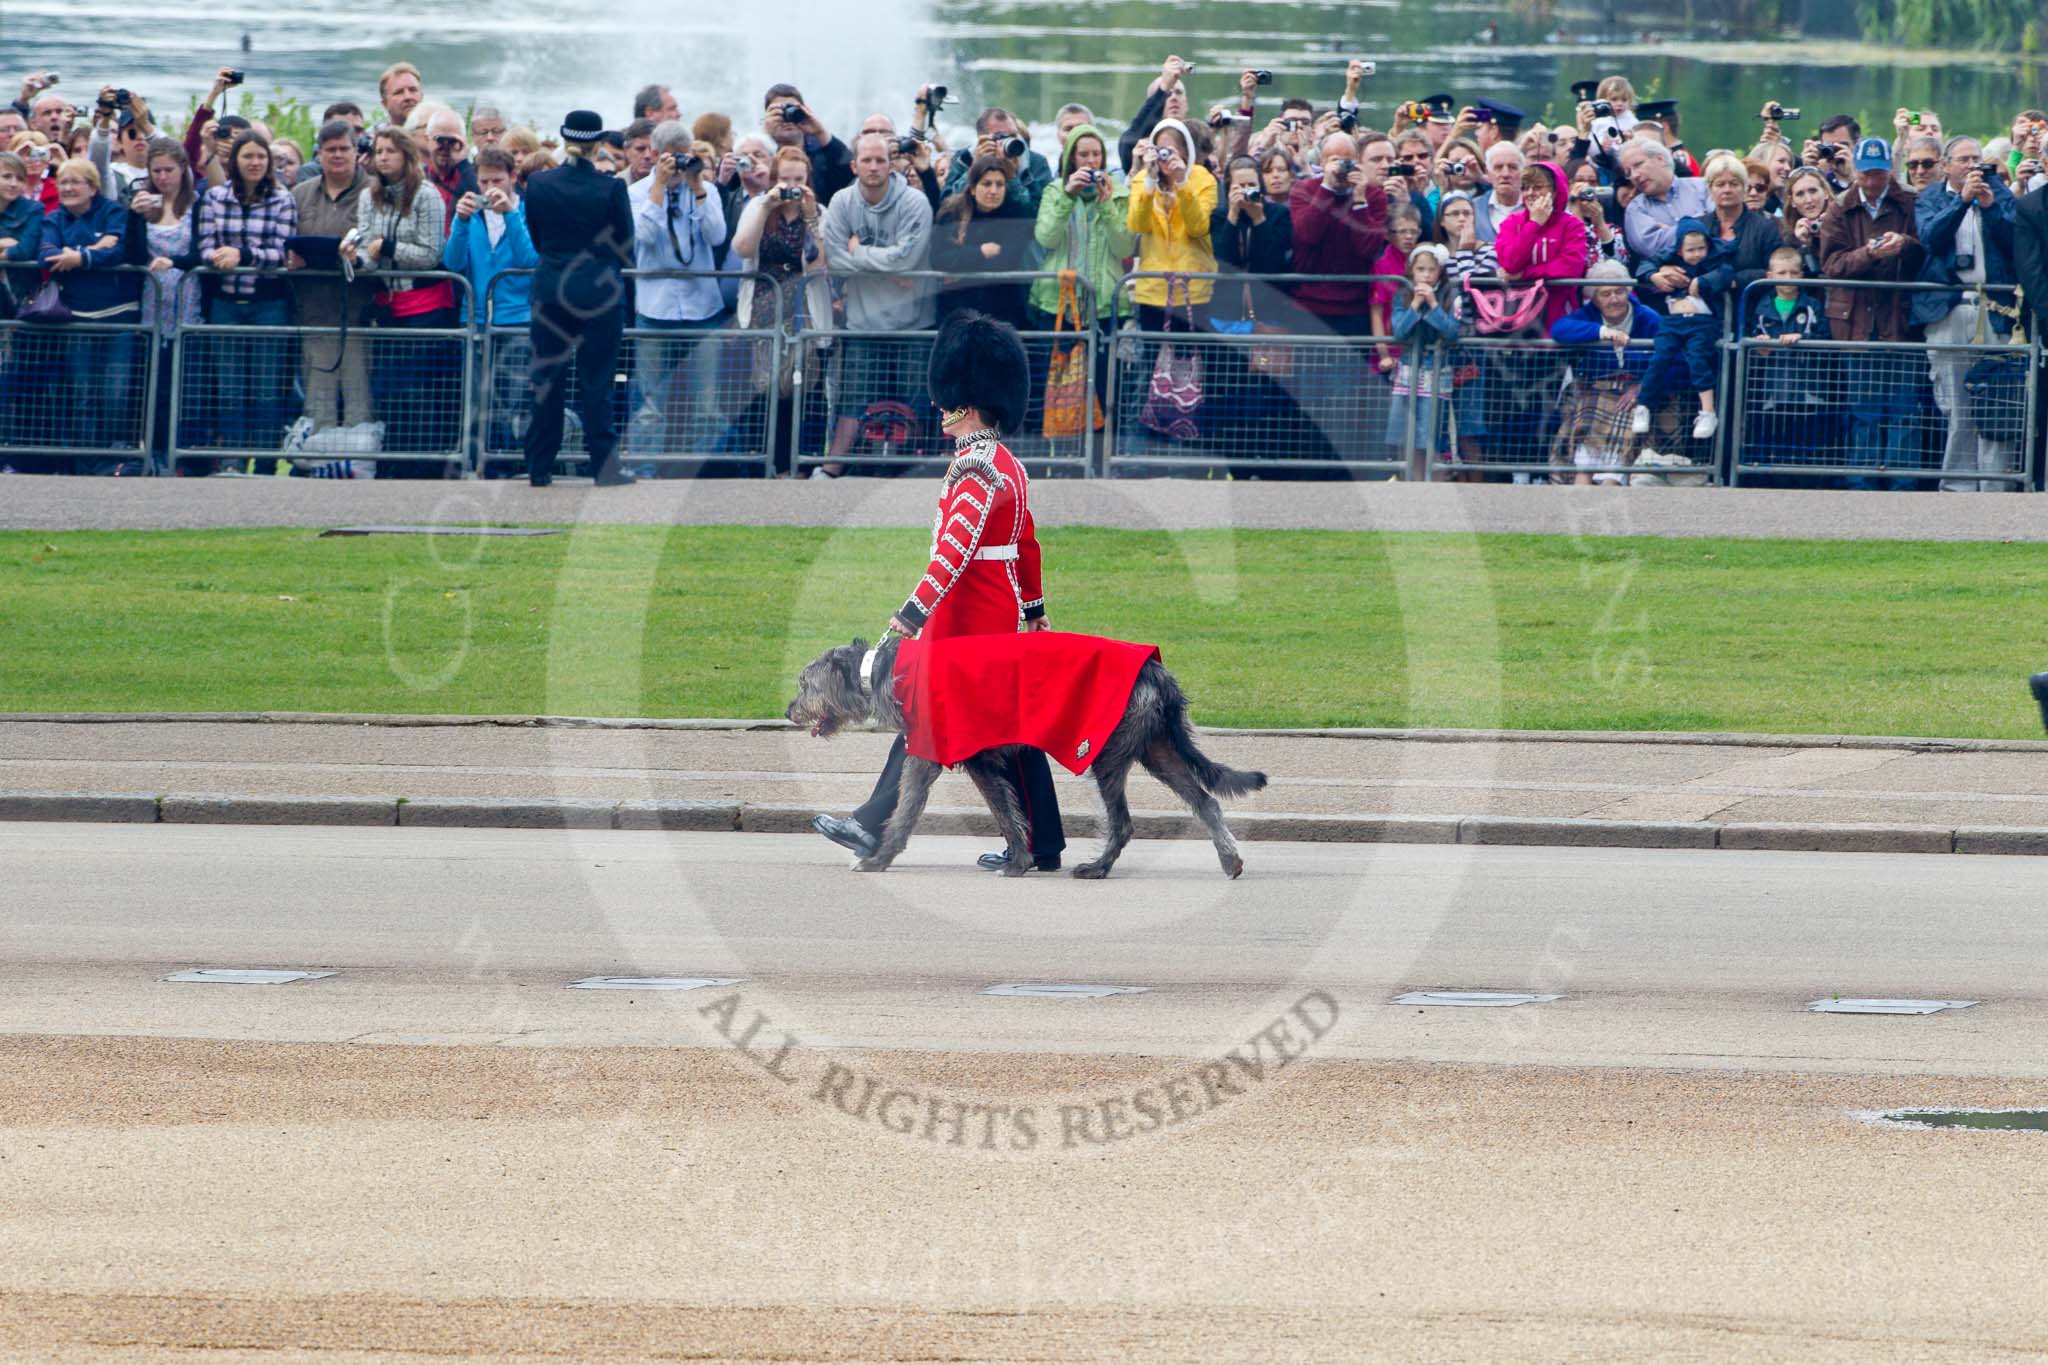 Trooping the Colour 2011: Conmael, an Irish Wolfhound, is the Regimental Mascot of the Band of the Irish Guards. All Regimental dogs have been named after the High Kings and Legendary Chieftains of Ireland. 
Conmael has also been at the Royal Wedding in 2011. Conmael does not take part in the parade.

He is led here by his handler, a member of the Corps of Drums, on Horse Guards Road, in front of spectators watching the parade from St Jame's Park..
Horse Guards Parade, Westminster,
London SW1,
Greater London,
United Kingdom,
on 11 June 2011 at 10:13, image #15